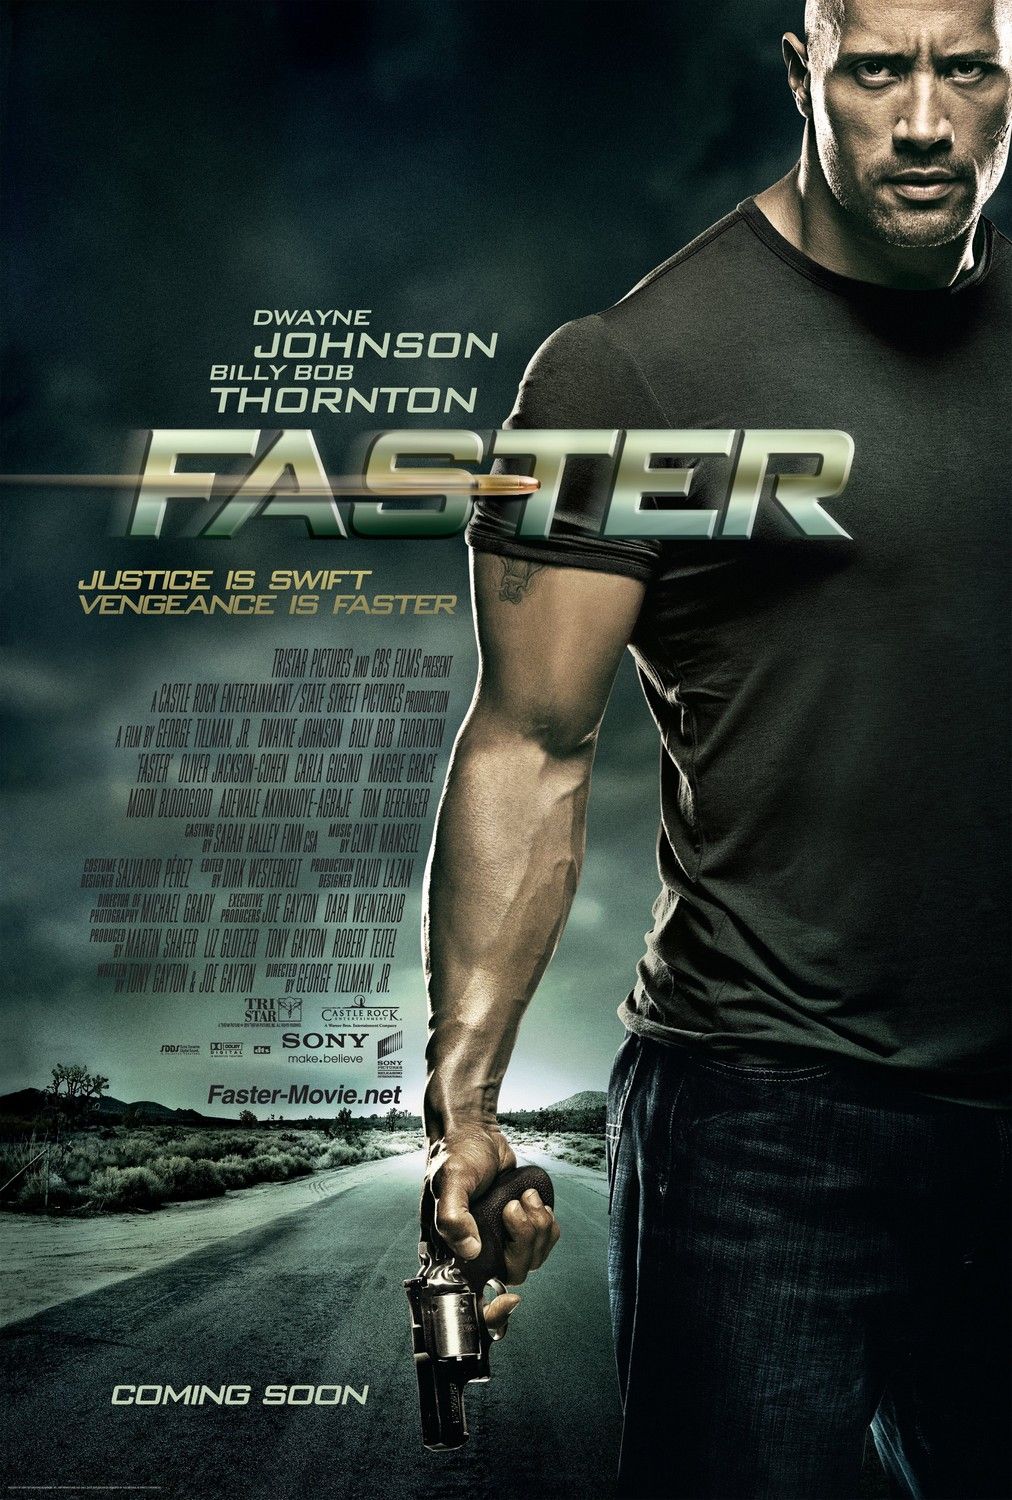 Dwayne+Johnson+Faster+Movie Faster 2010 UnRated DvDrip XviD Absurdity